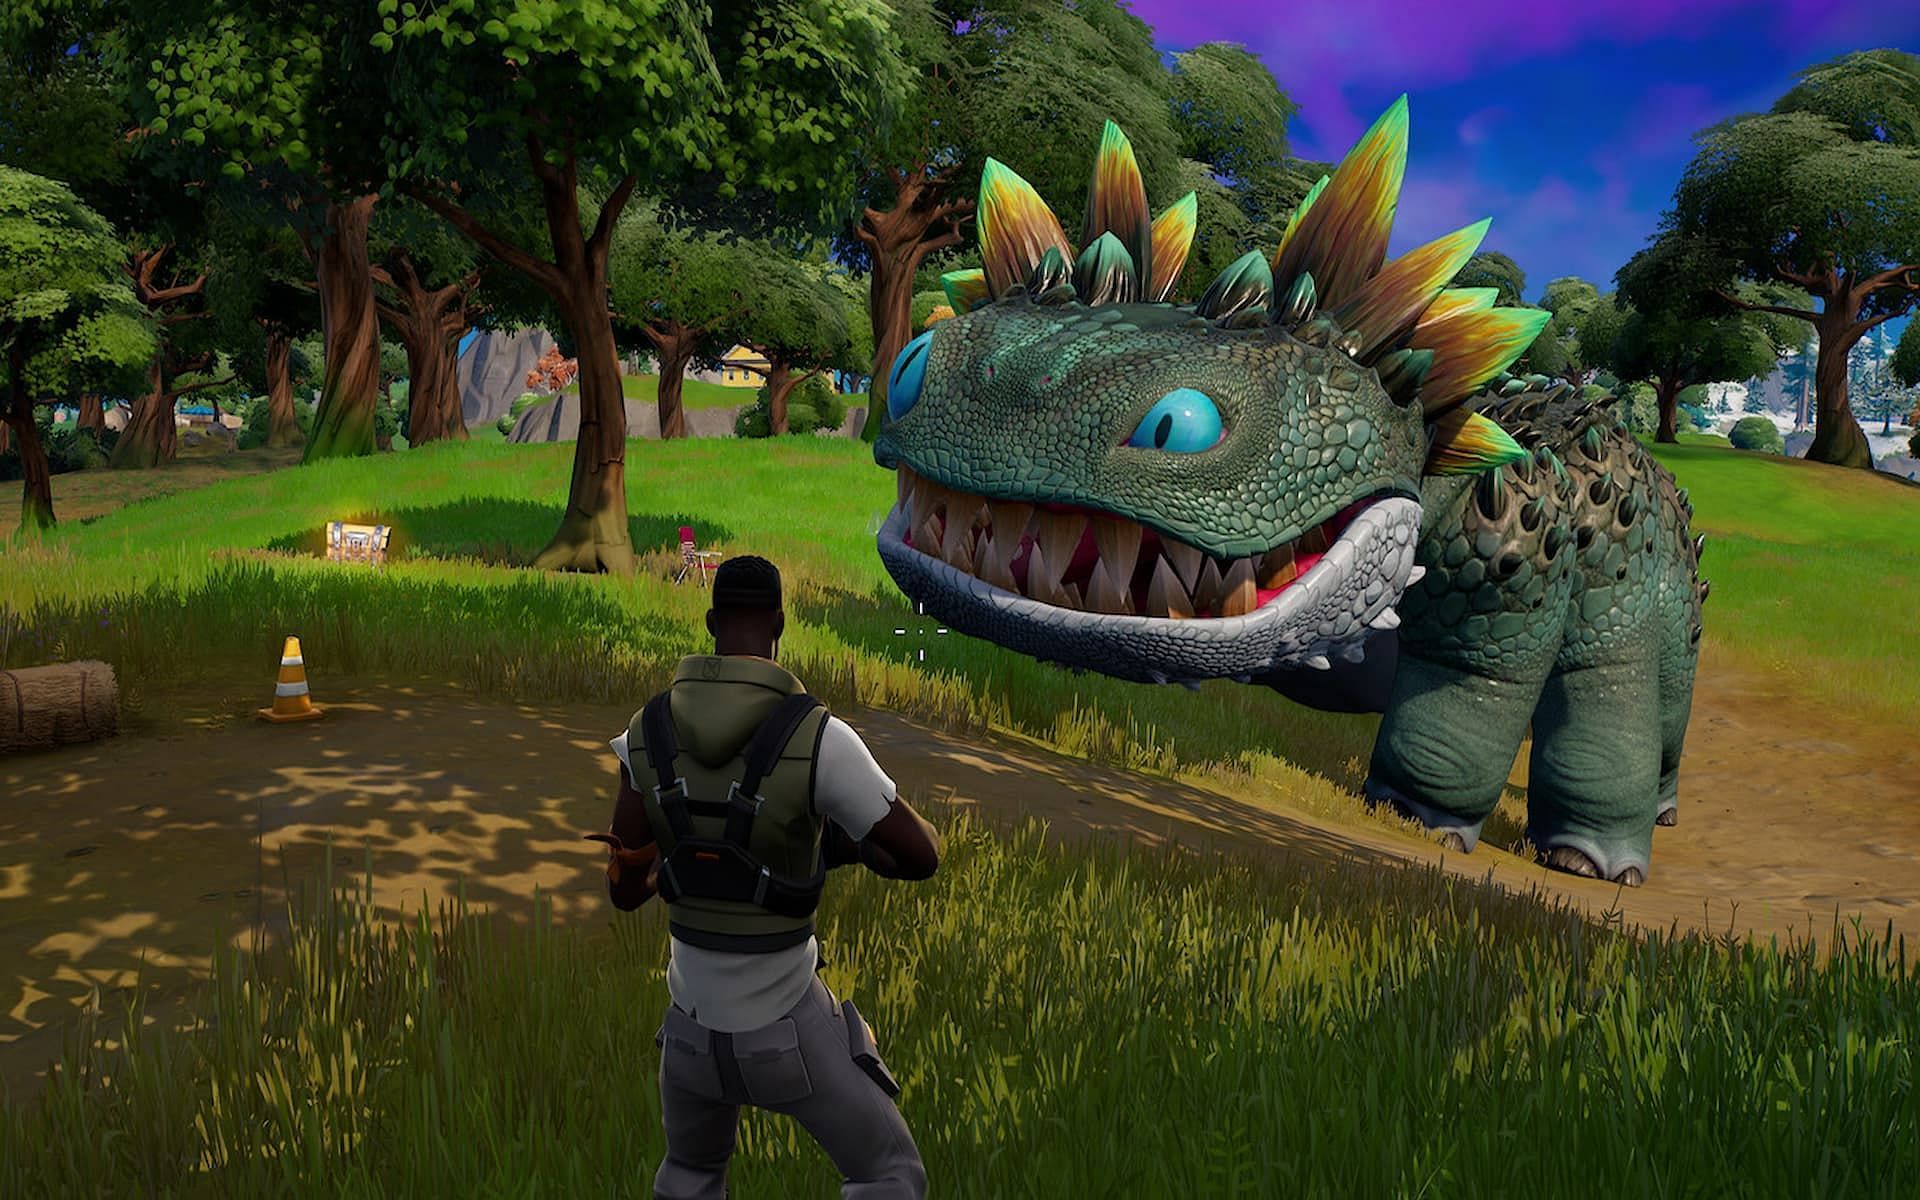 A player encounters a Klombo in Fortnite (Image via Epic Games)